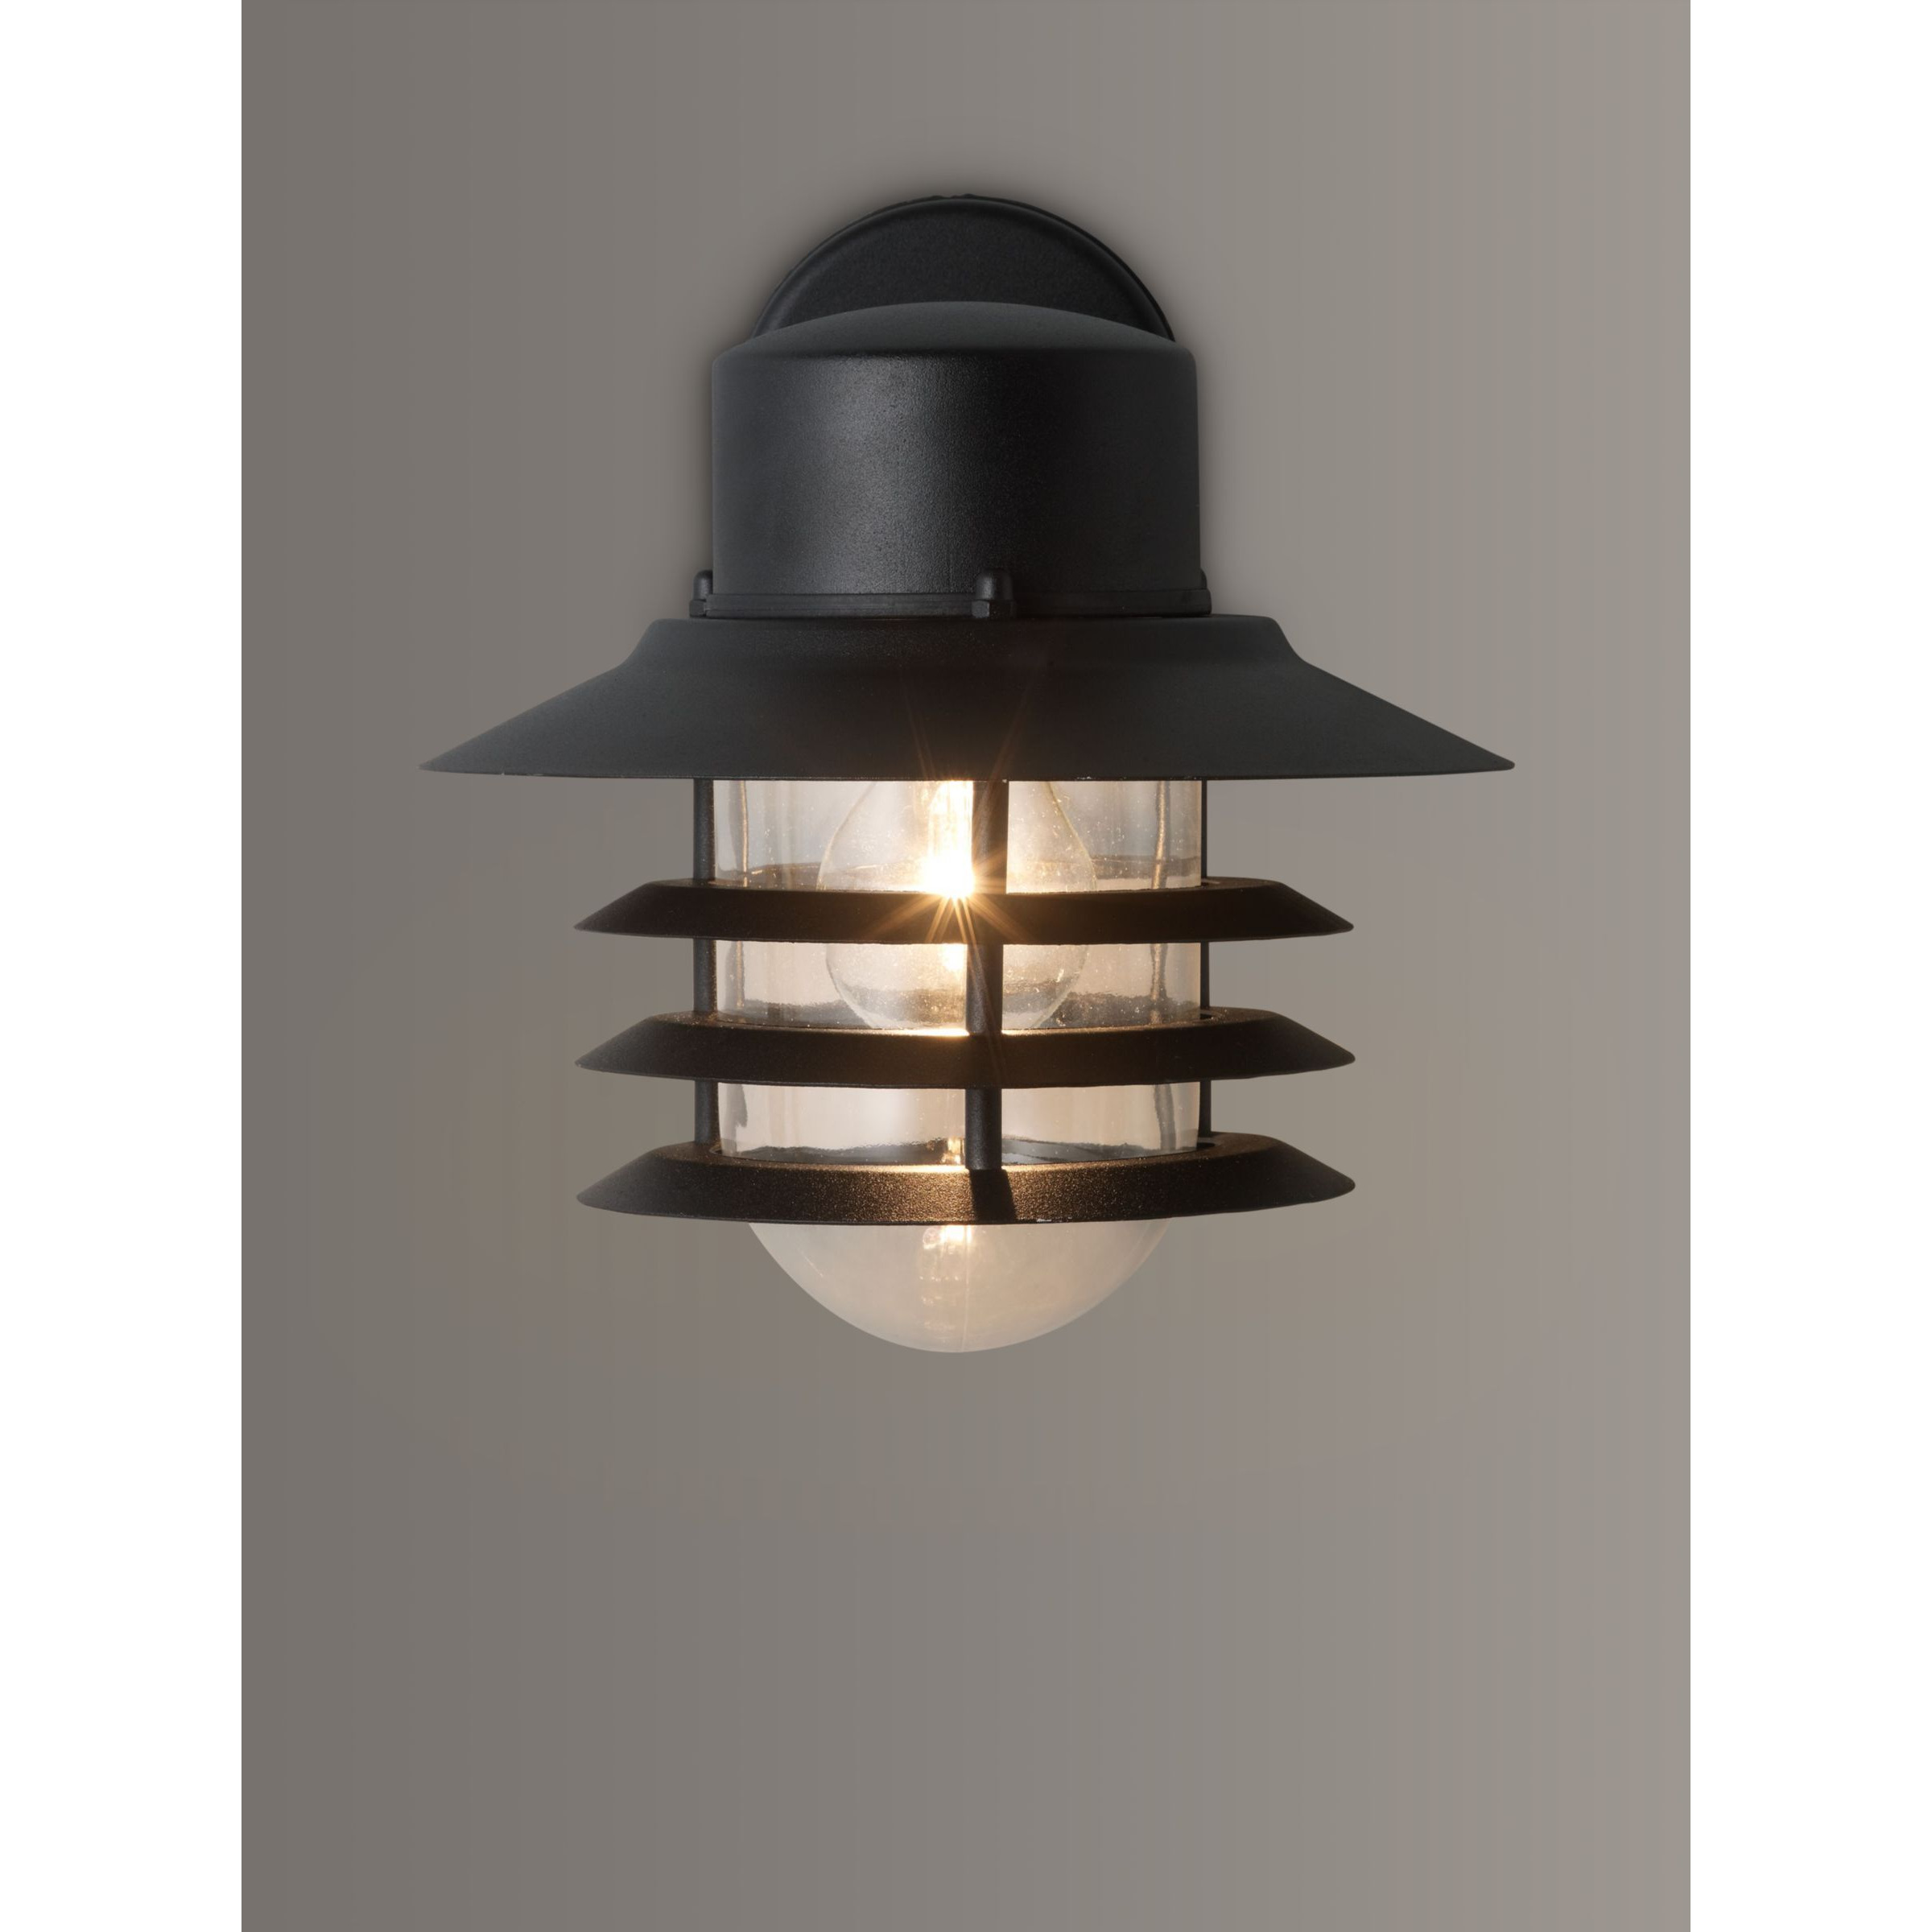 Nordlux Vejers Outdoor Wall Lantern - image 1